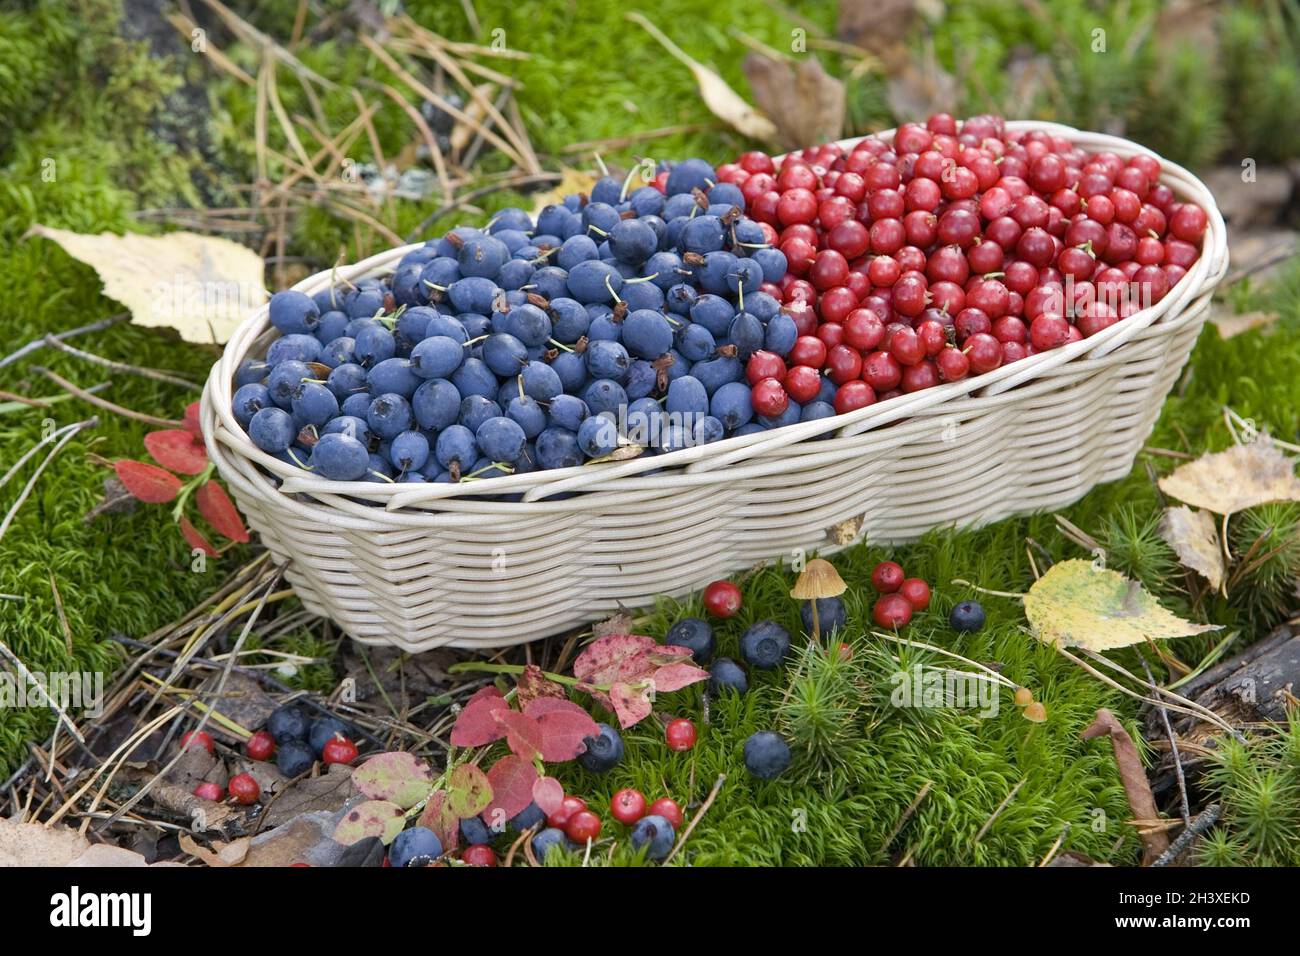 Wild berries in a basket, blueberries and lingonberries. Stock Photo